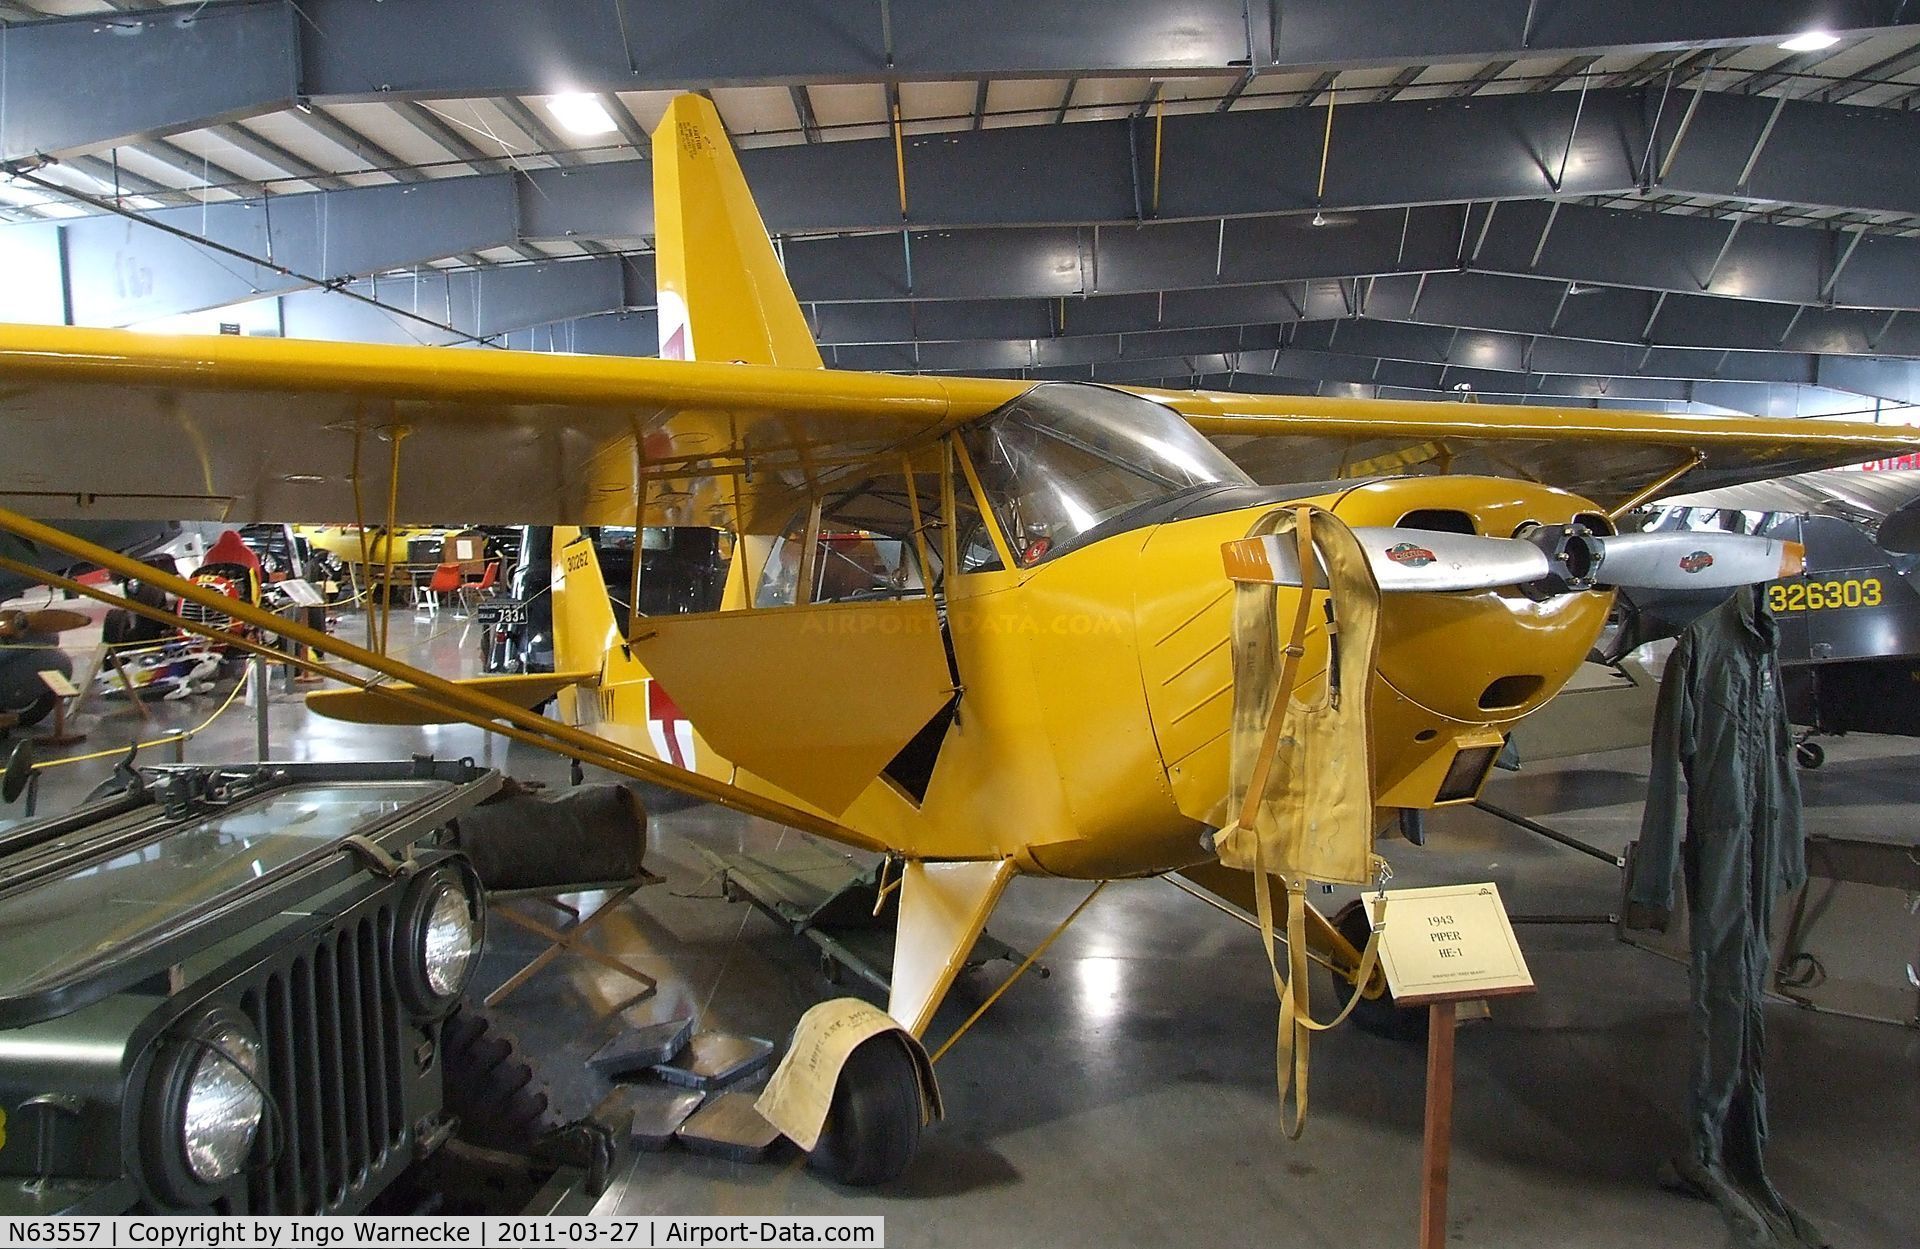 N63557, Piper AE-1 C/N 5-1465, Piper AE-1 at the Western Antique Aeroplane and Automobile Museum, Hood River OR